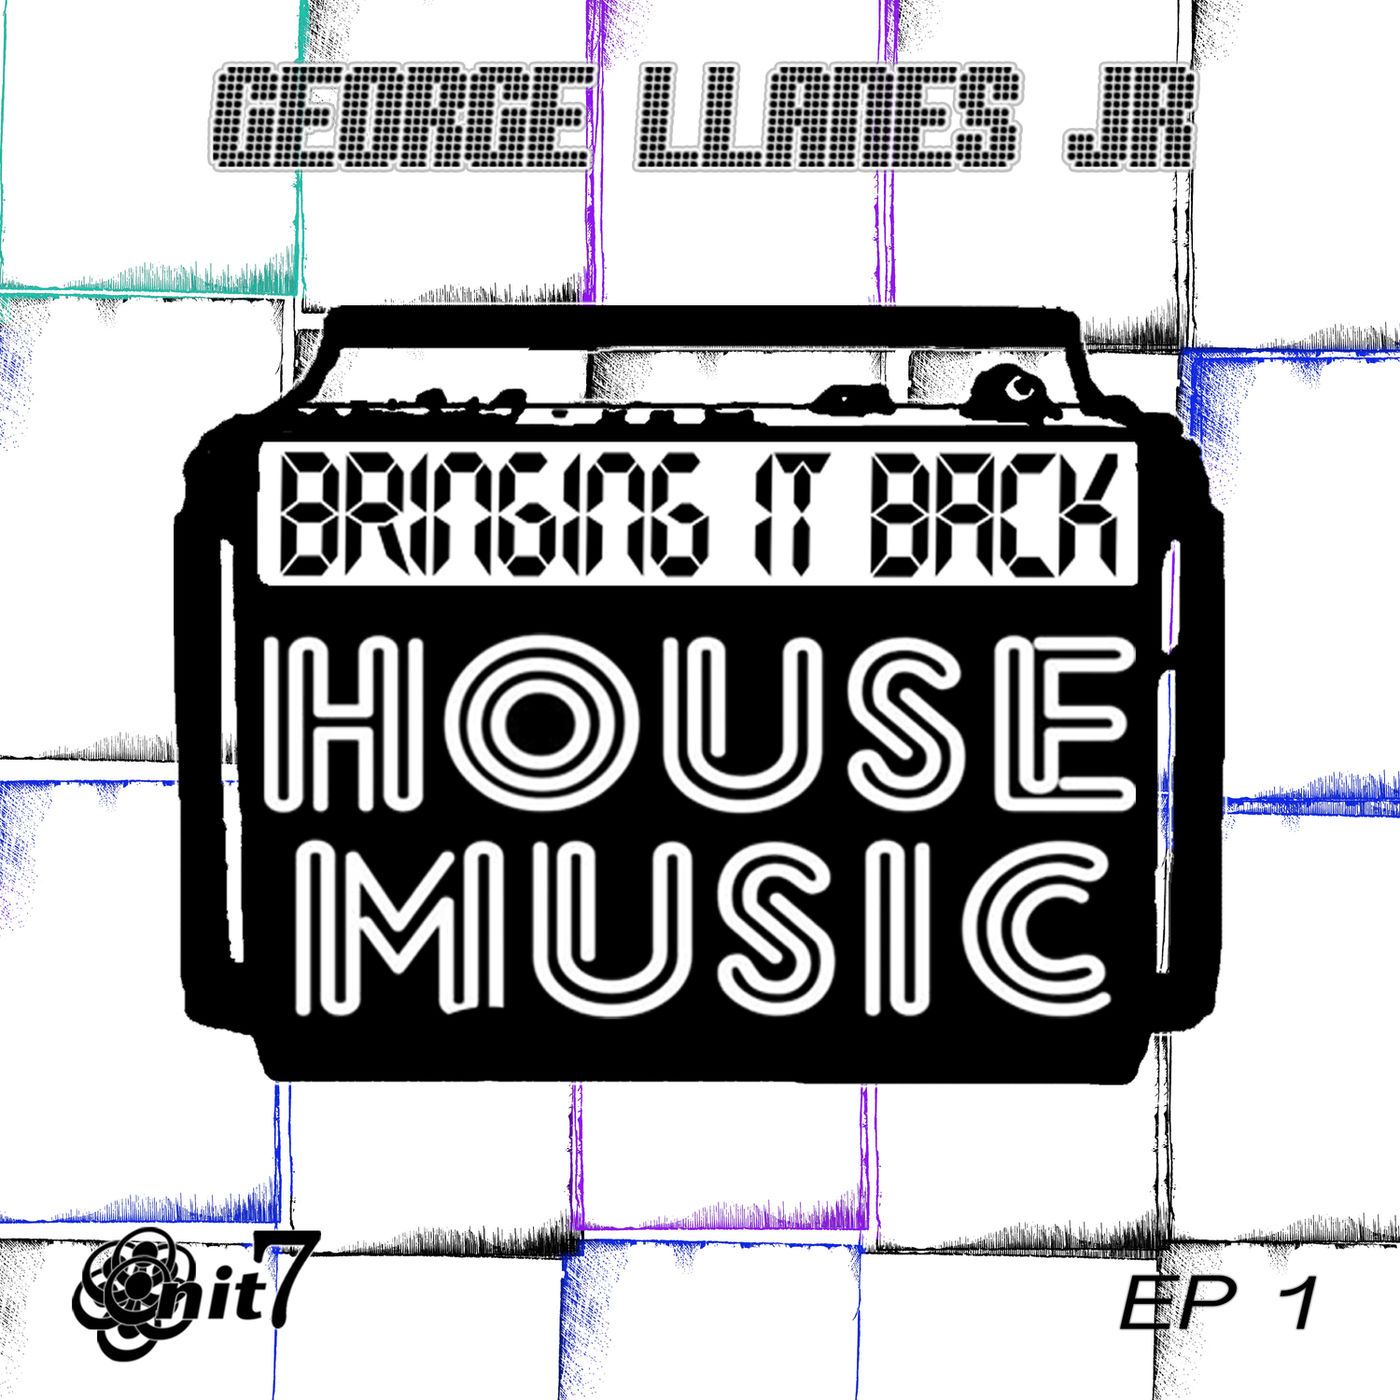 George Llanes Jr. - Bringing It Back House Music / Onit 7 Records